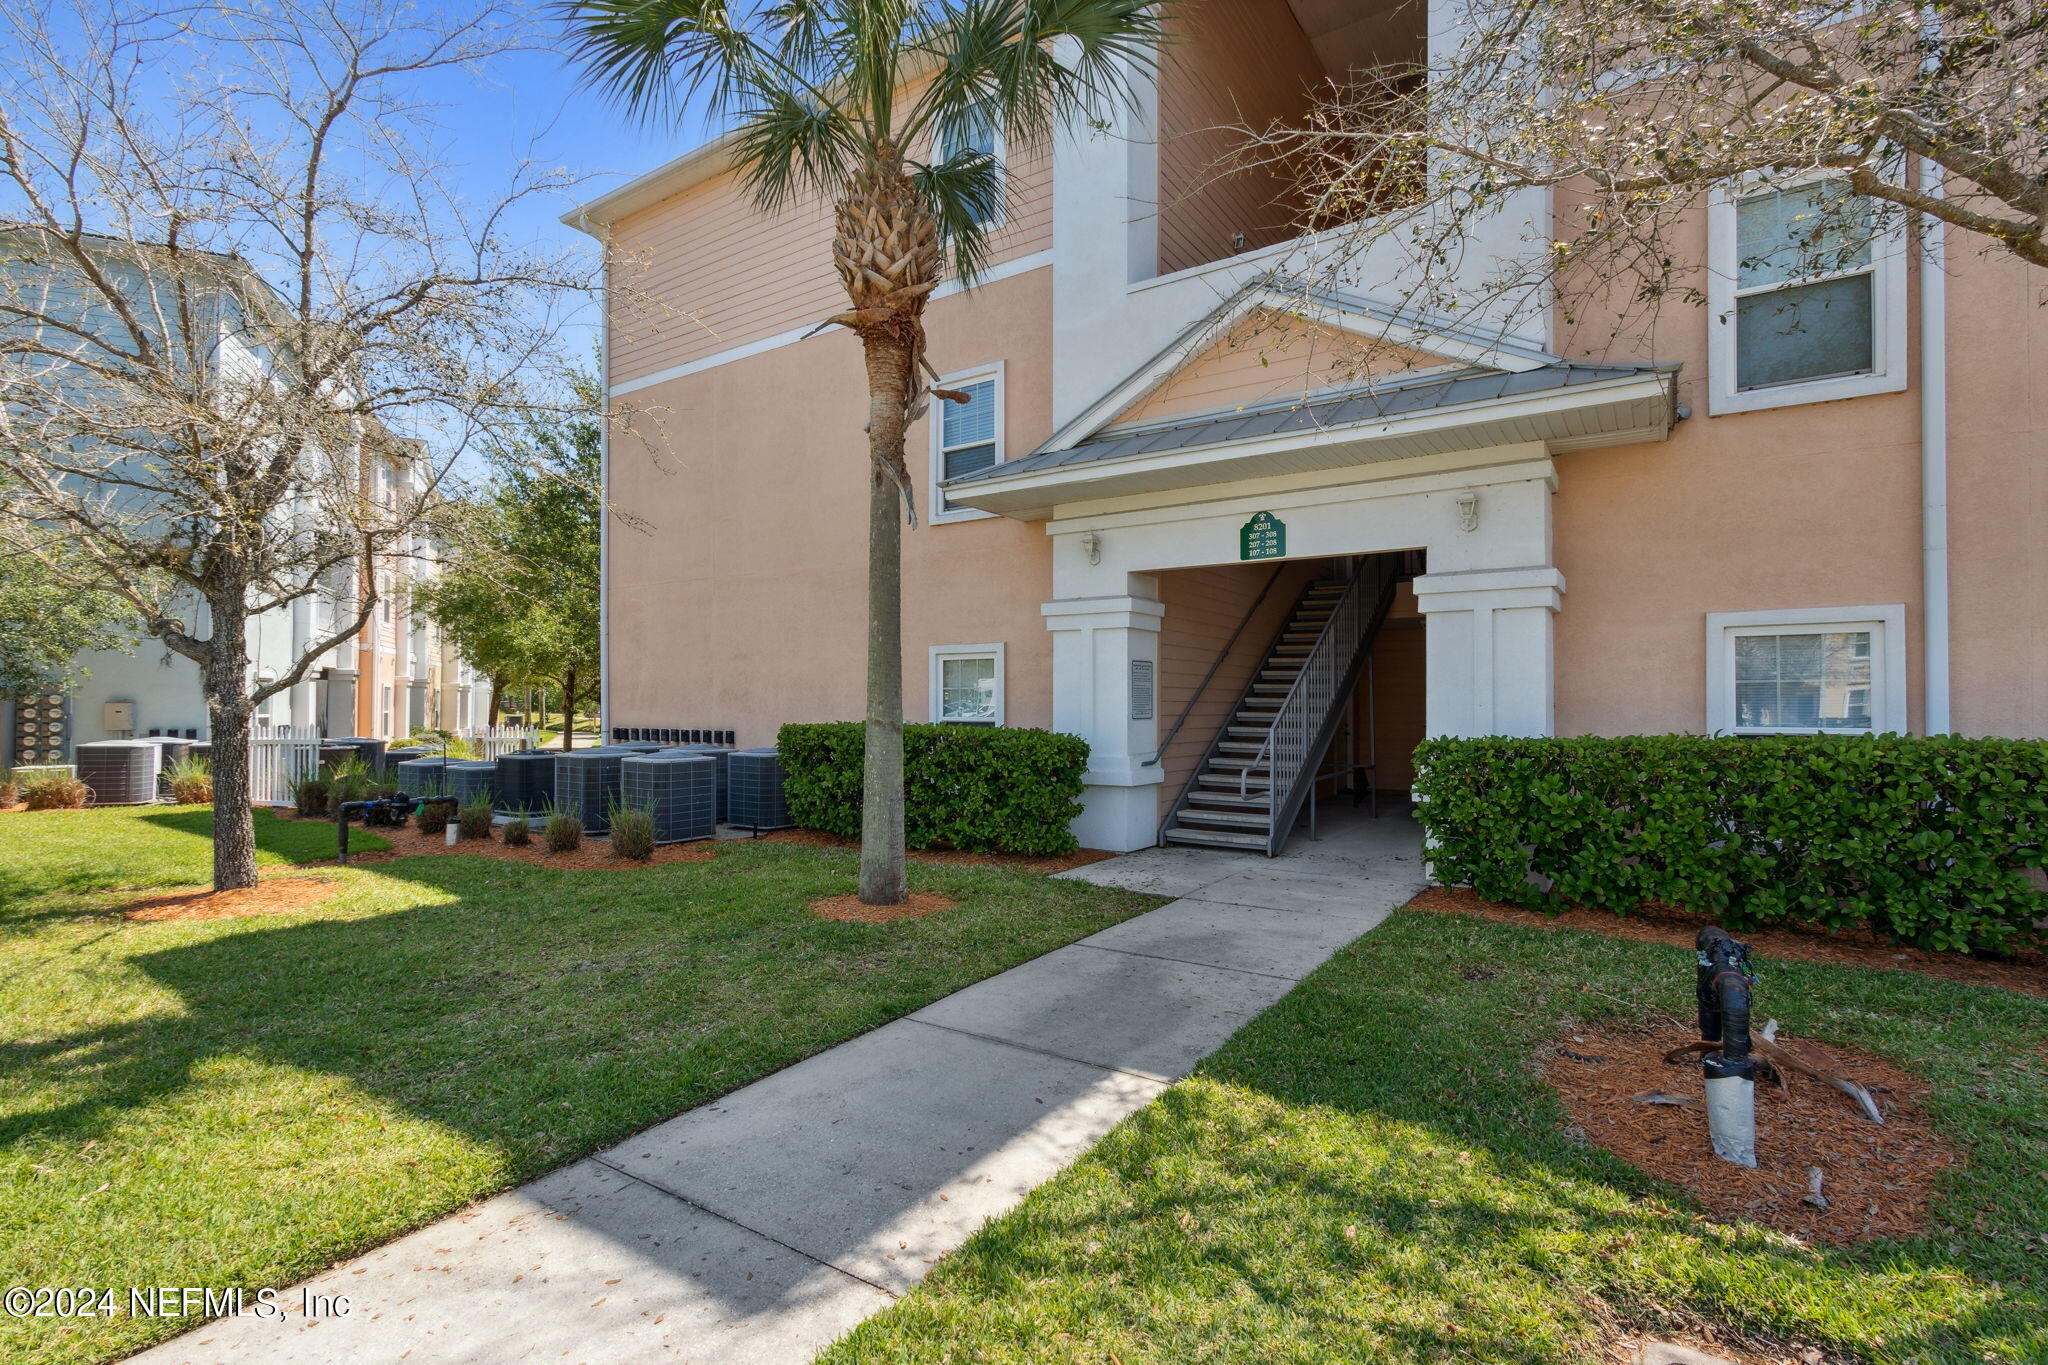 Jacksonville, FL home for sale located at 8201 Green Parrot Road Unit 107, Jacksonville, FL 32256